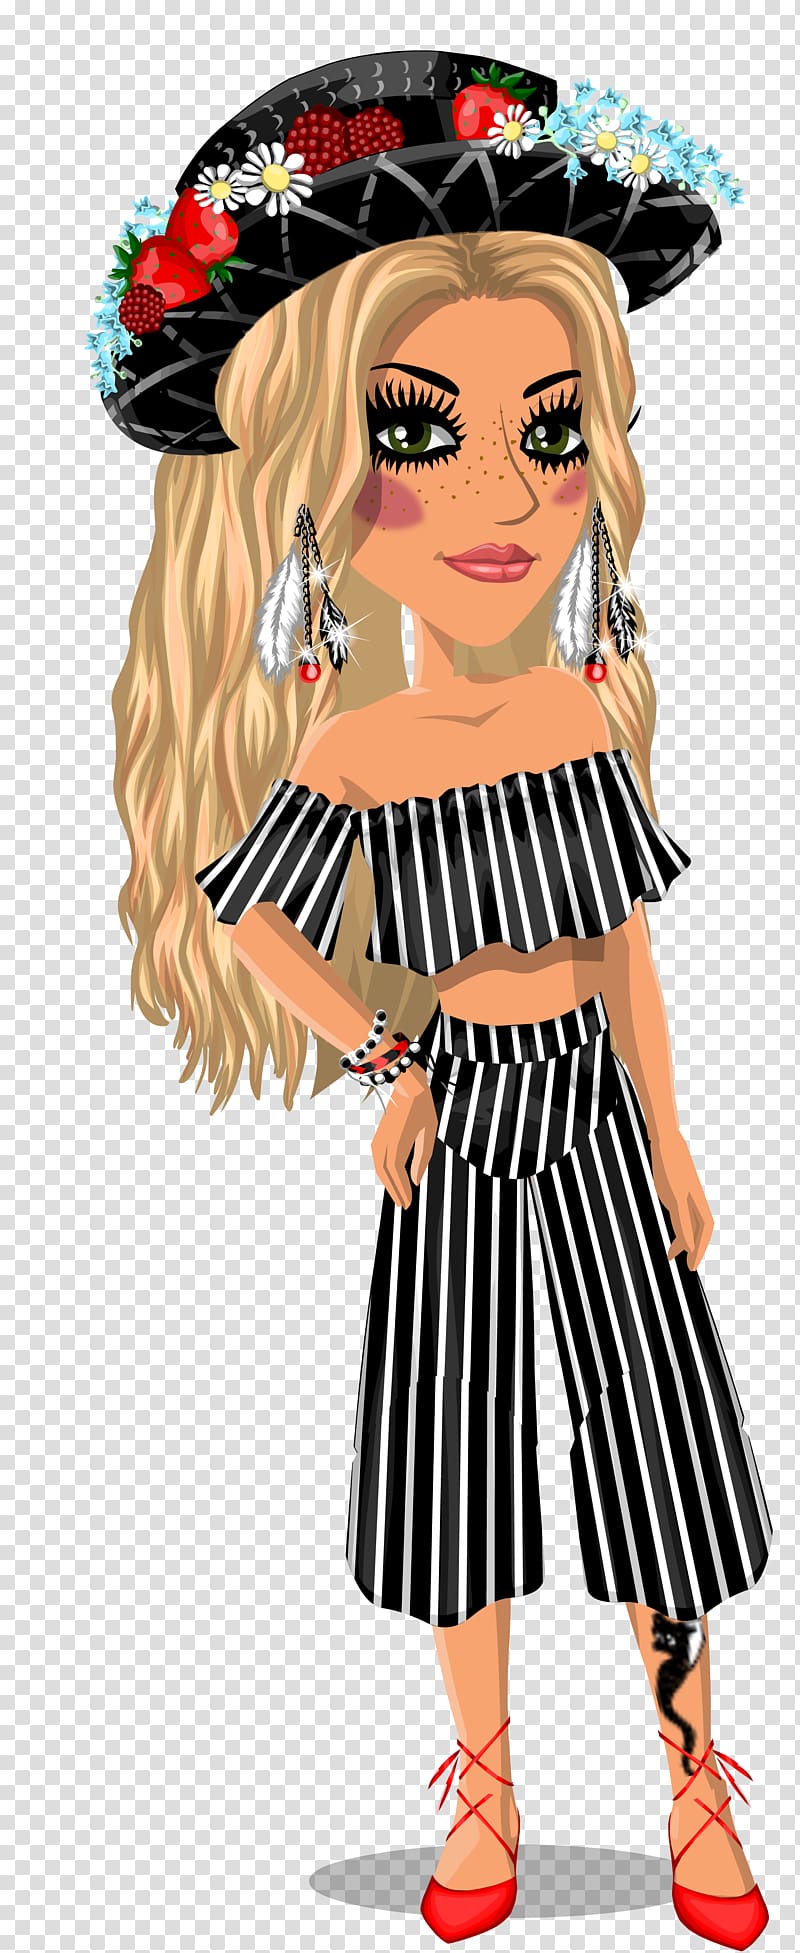 MovieStarPlanet Hair User Costume design , STYLE transparent background PNG clipart